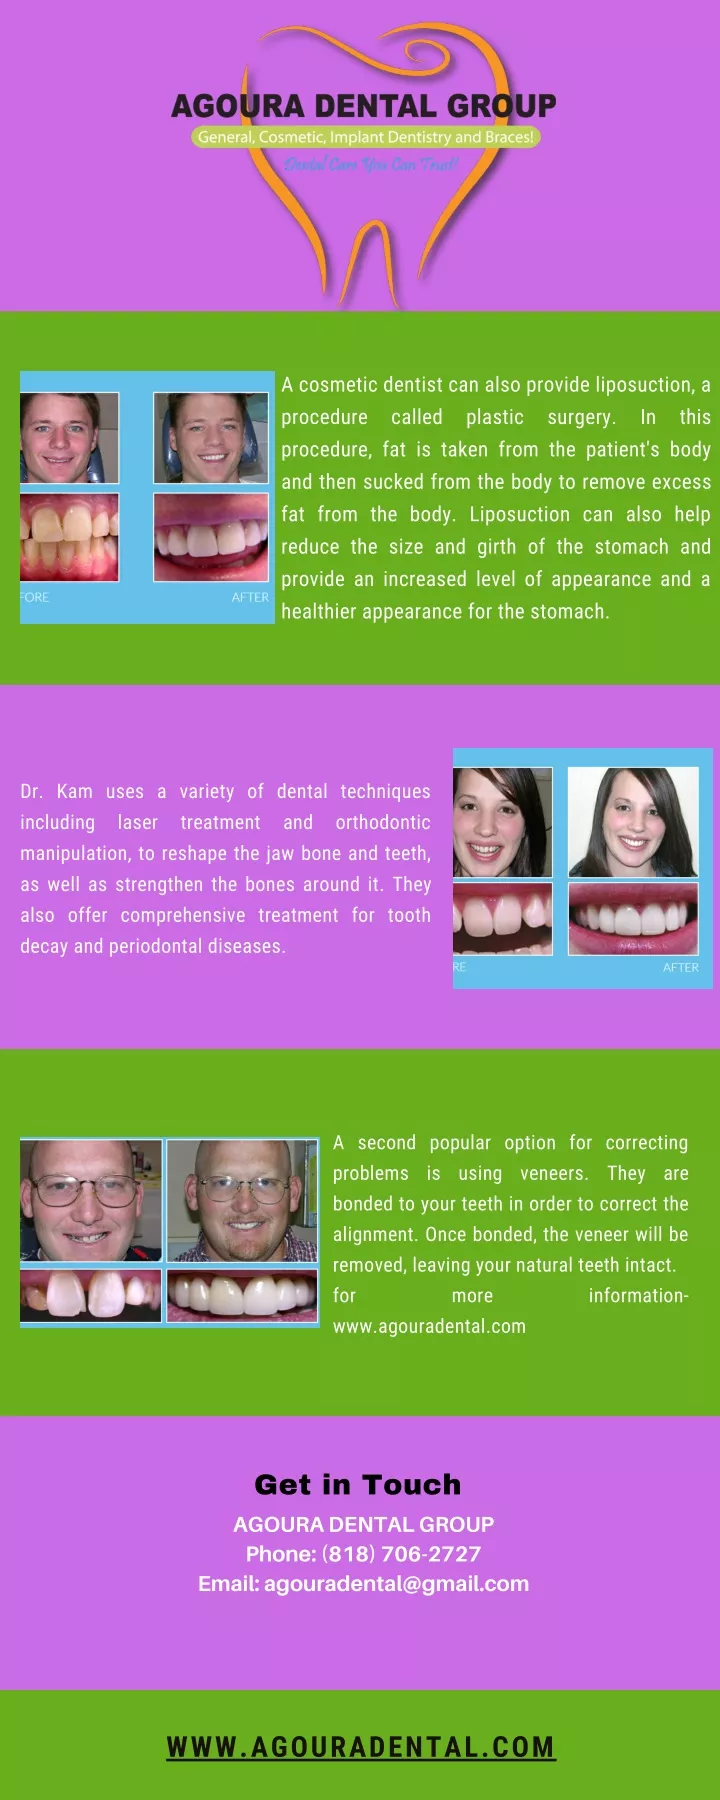 a cosmetic dentist can also provide liposuction